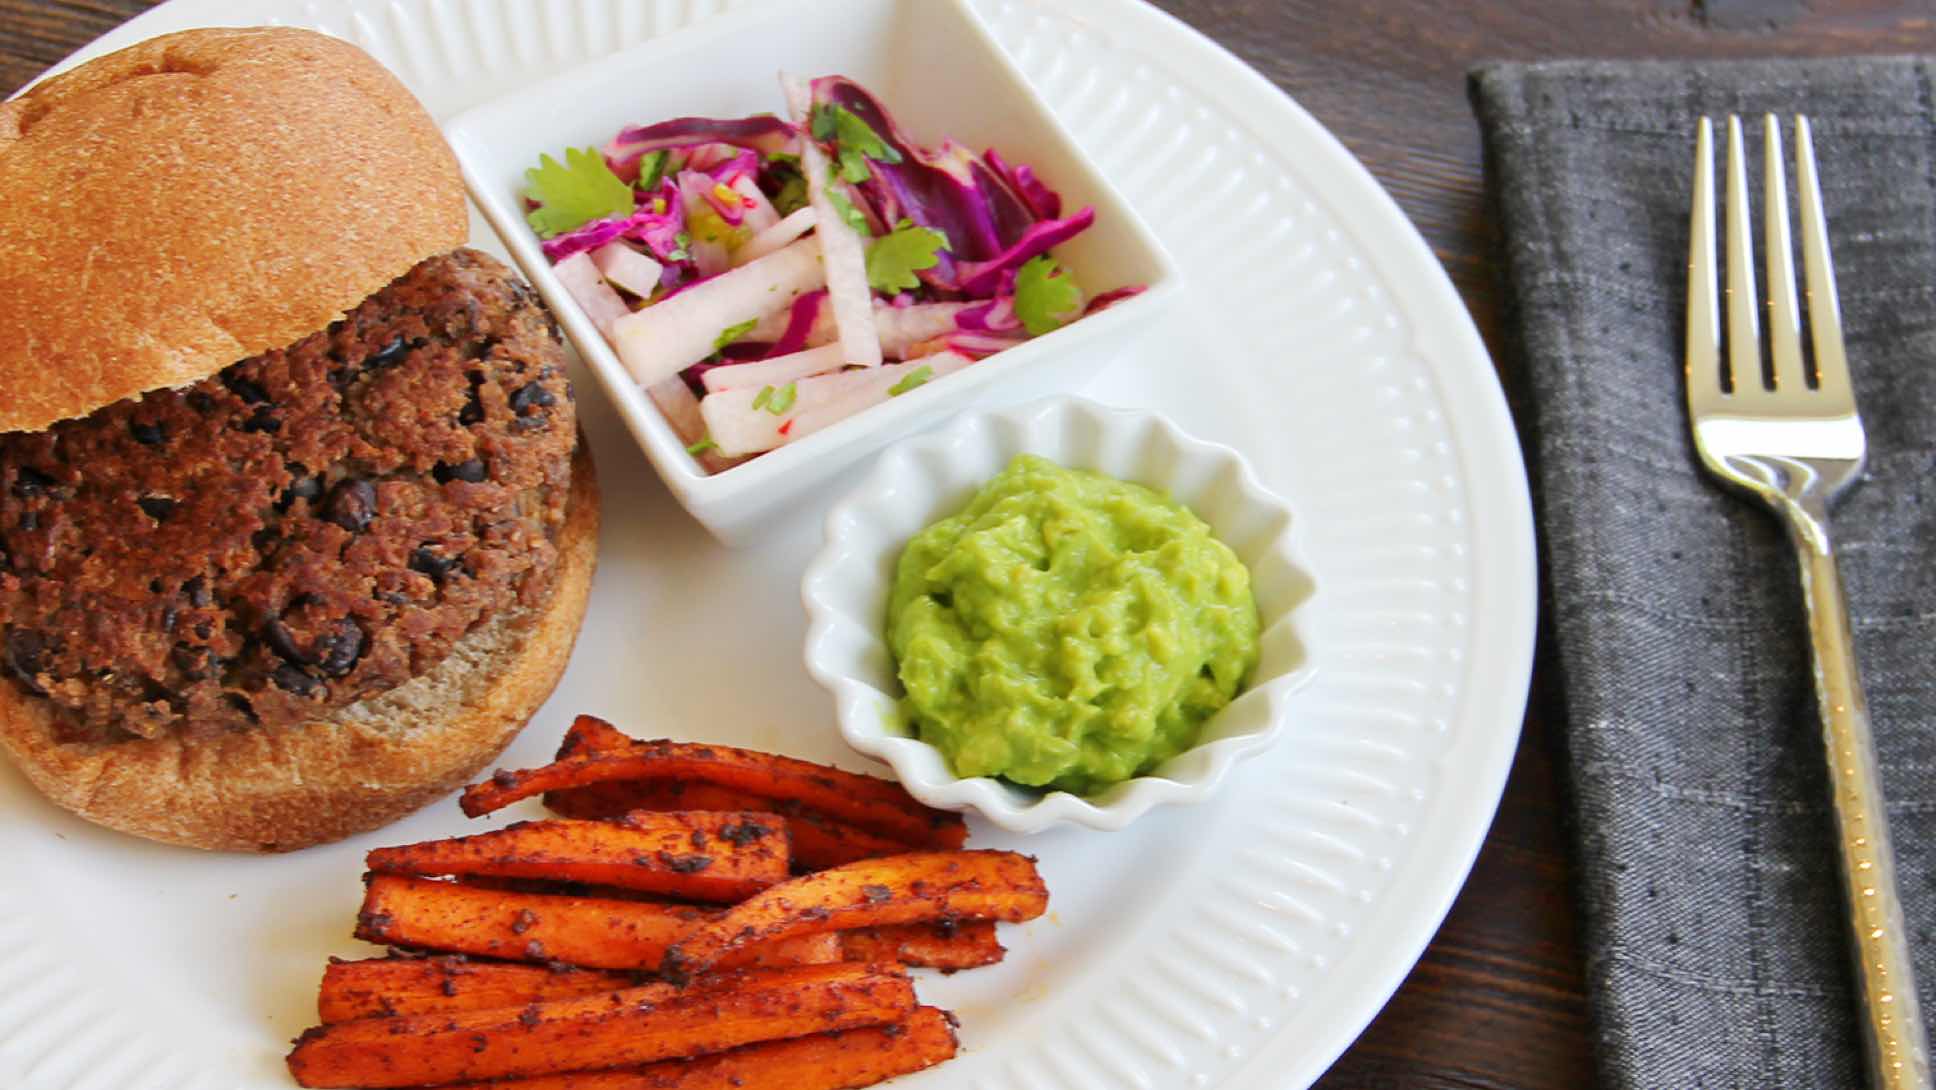 Black bean burger with carrot fries, slaw and guacamole.